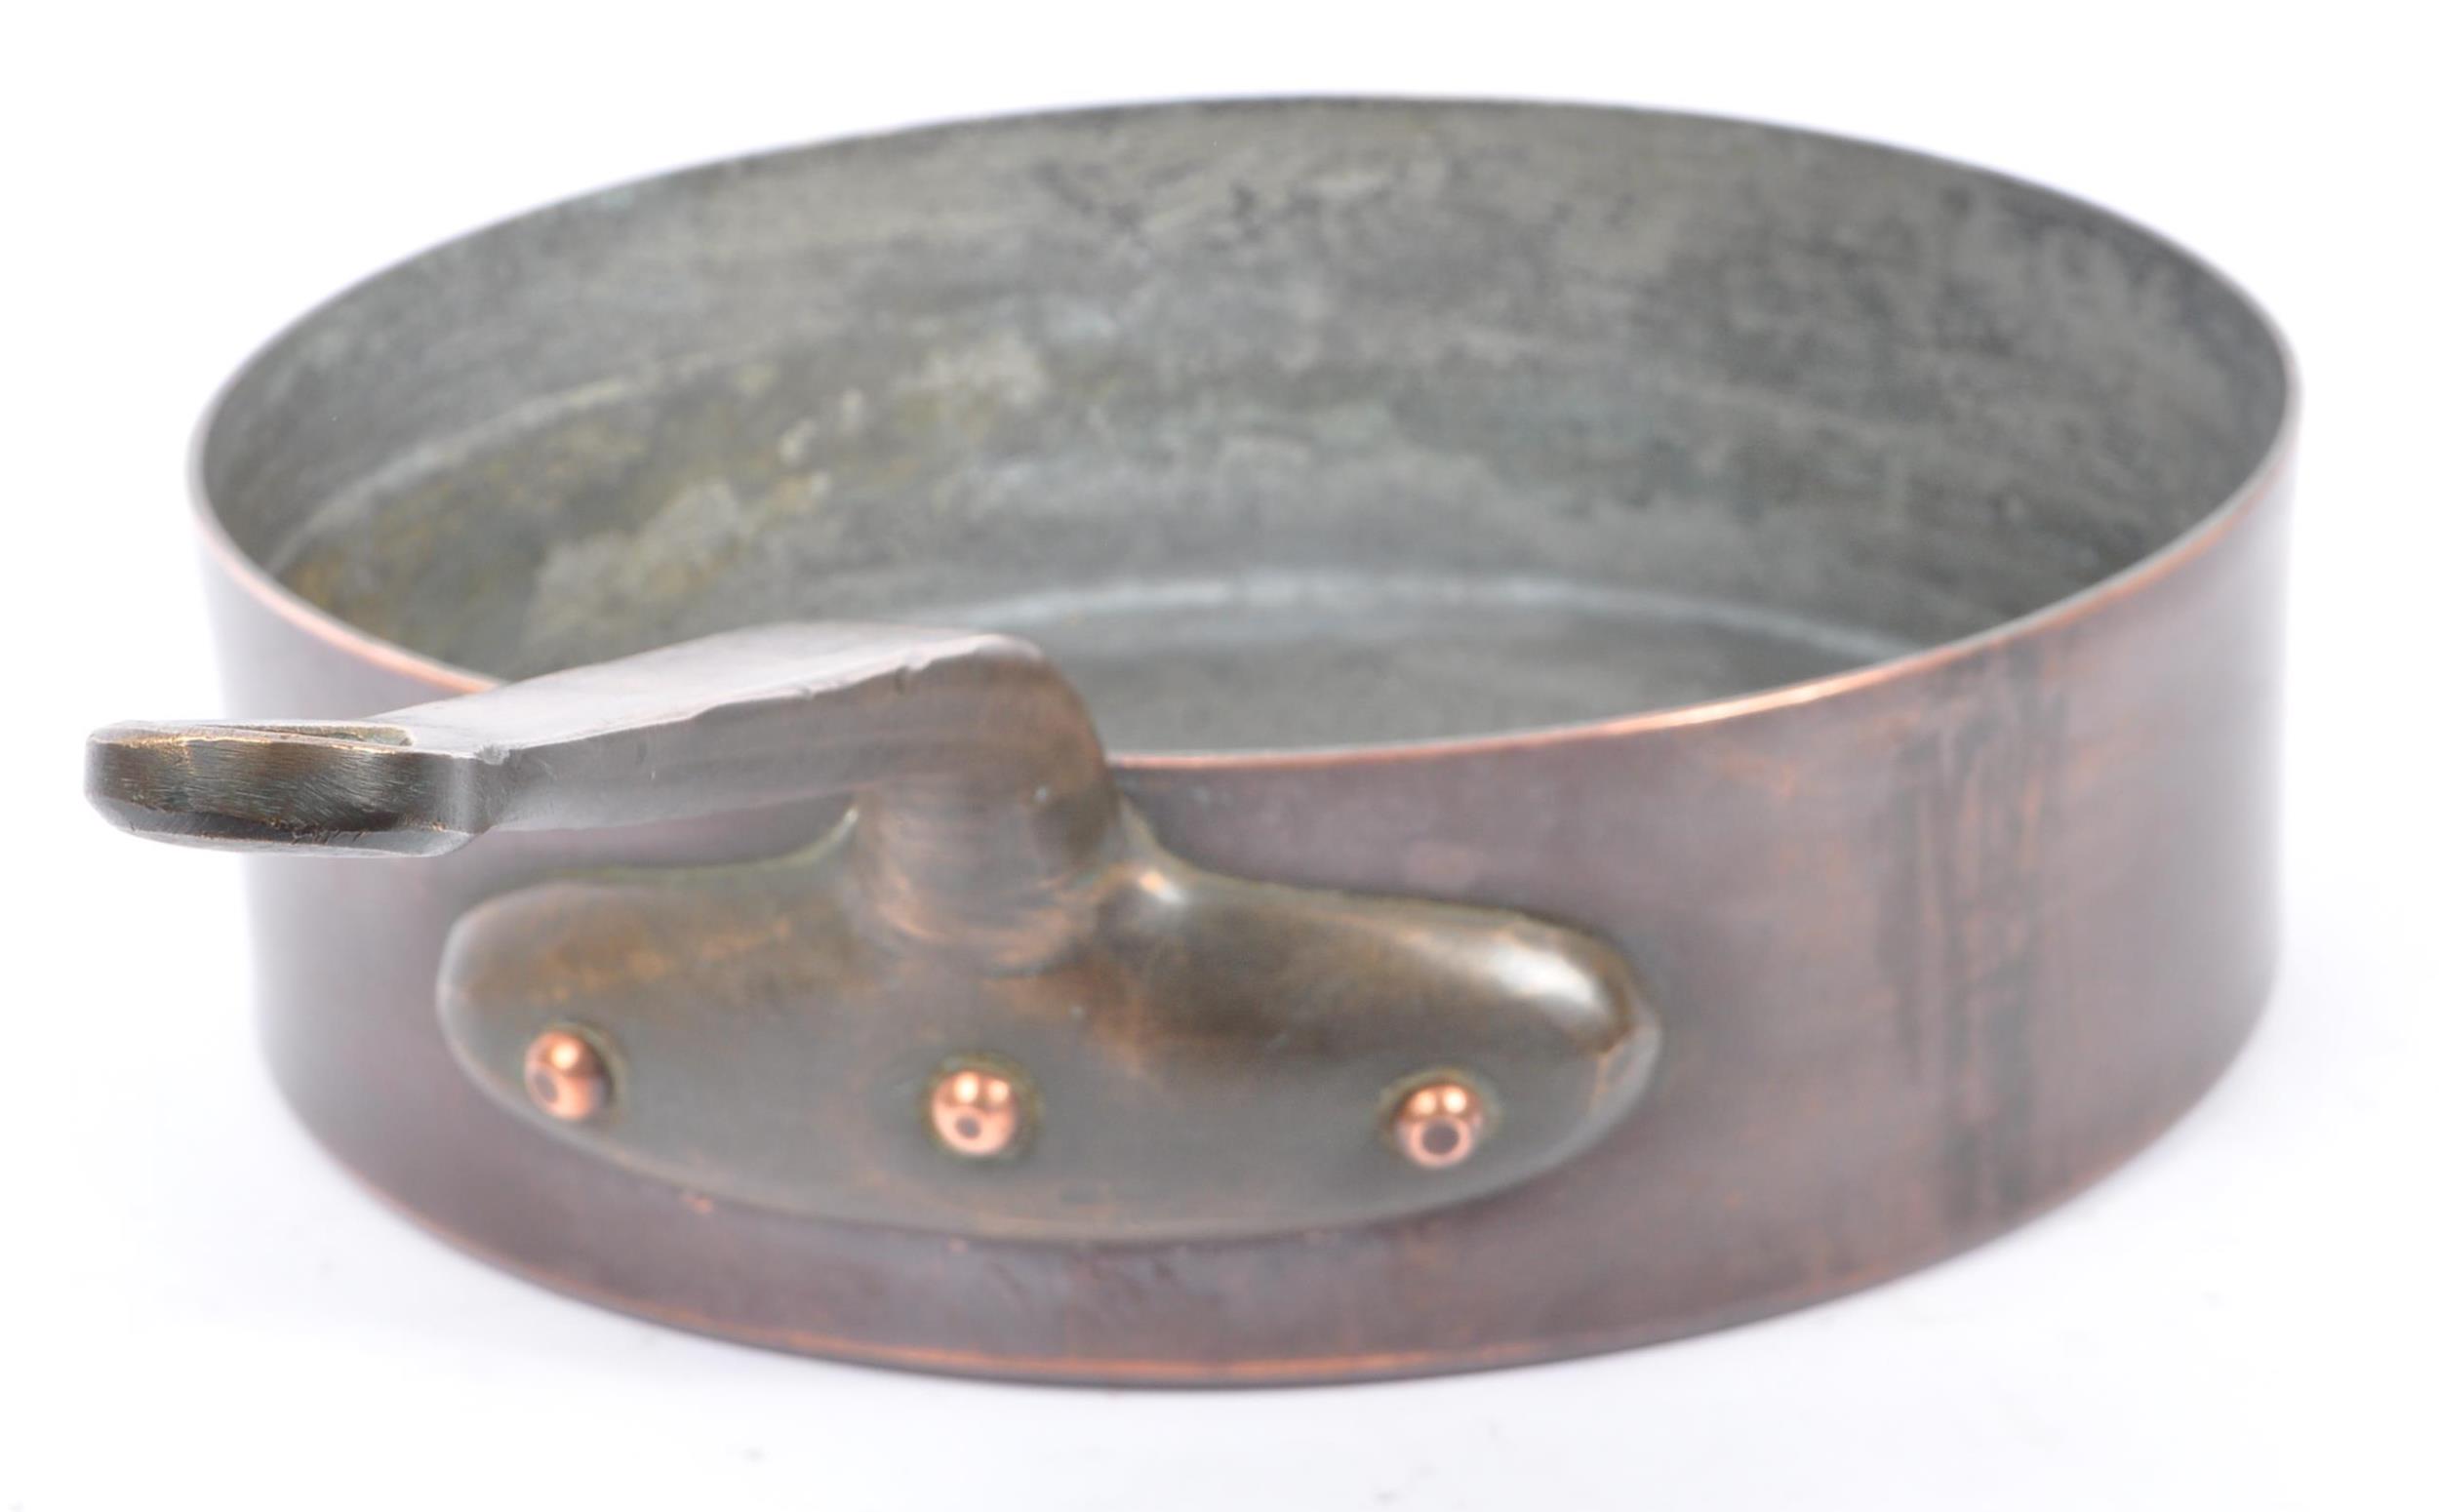 LARGE HEAVYWEIGHT MID 20TH CENTURY COPPER & BRONZE SKILLET PAN - Image 4 of 5